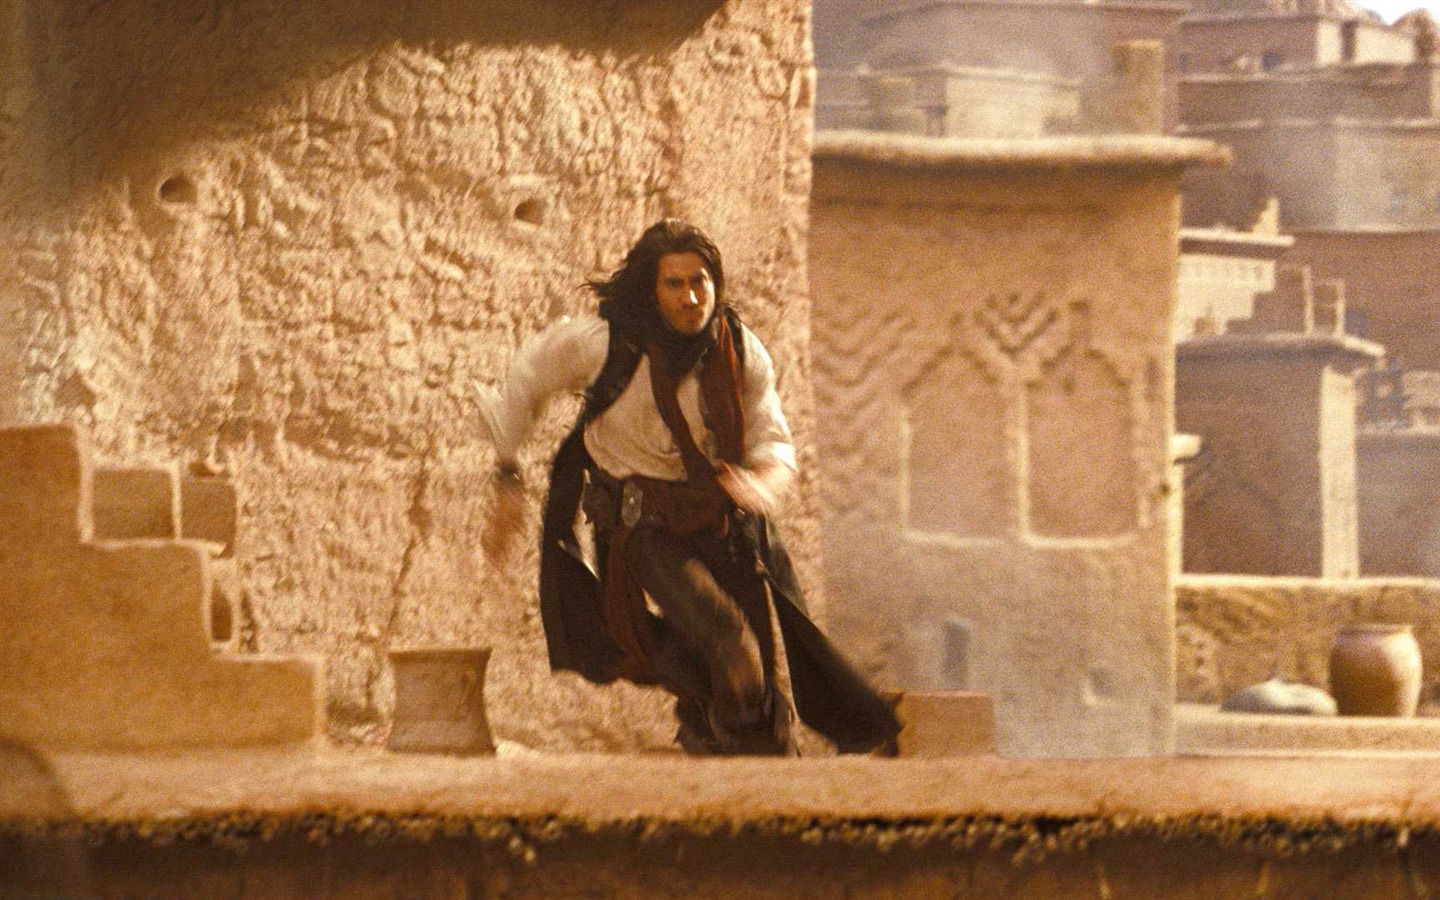 Prince of Persia The Sands of Time wallpaper #34 - 1440x900